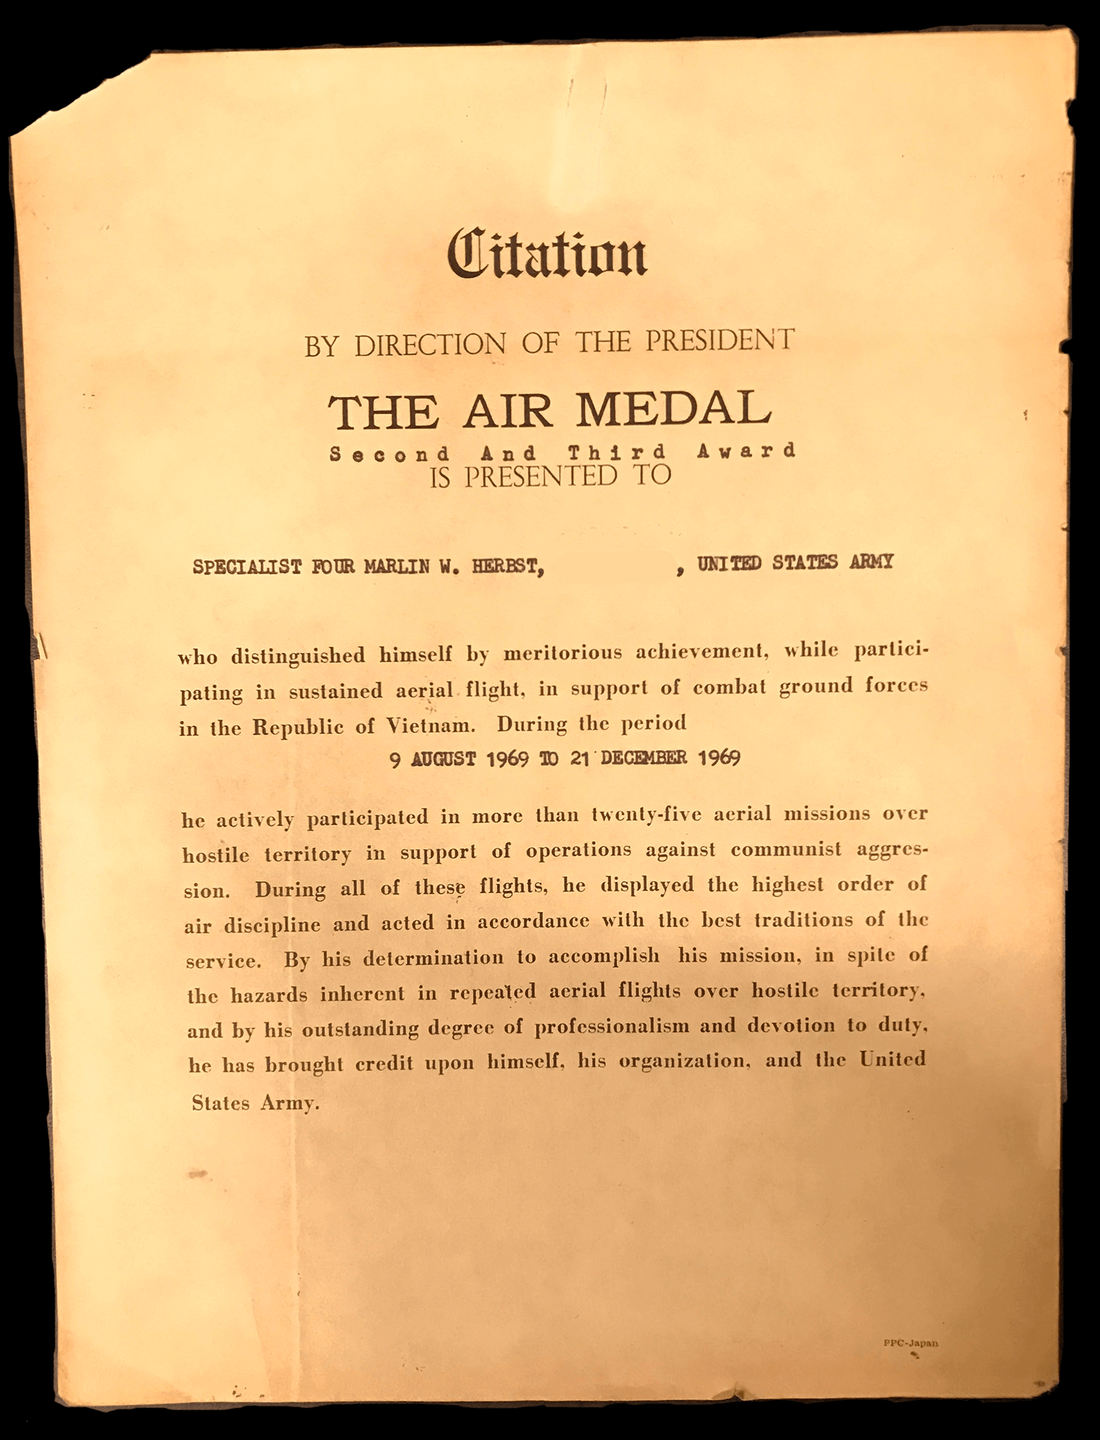 Citation for an Air Medal, presented to Marlin Herbst for period of 8-9-1969 through 12-21-1969.